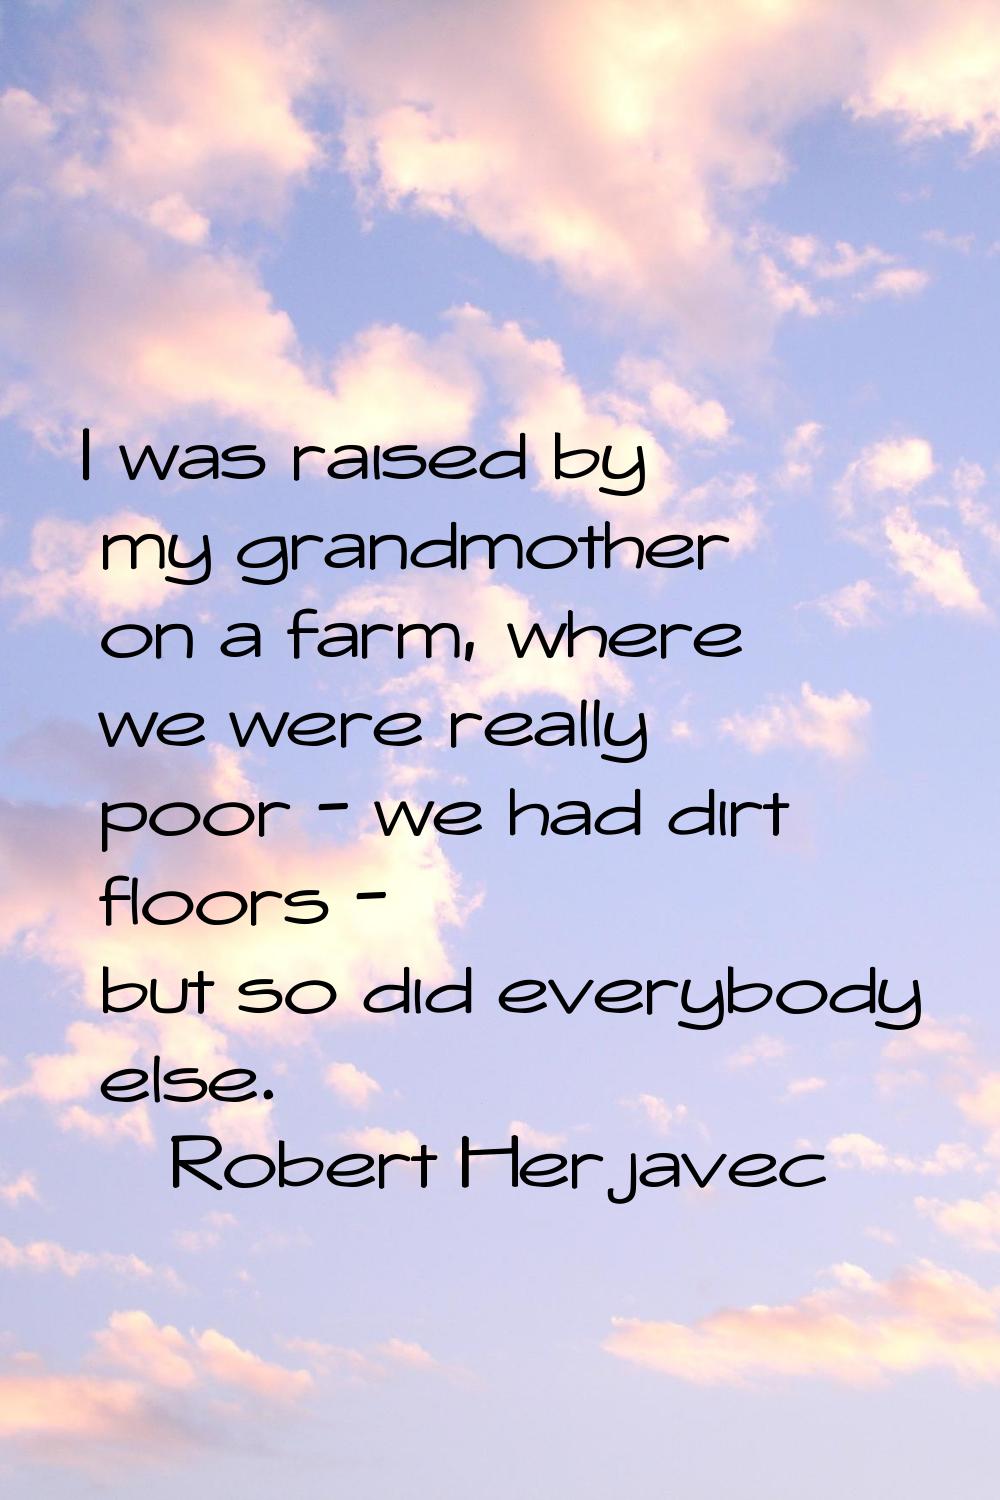 I was raised by my grandmother on a farm, where we were really poor - we had dirt floors - but so d